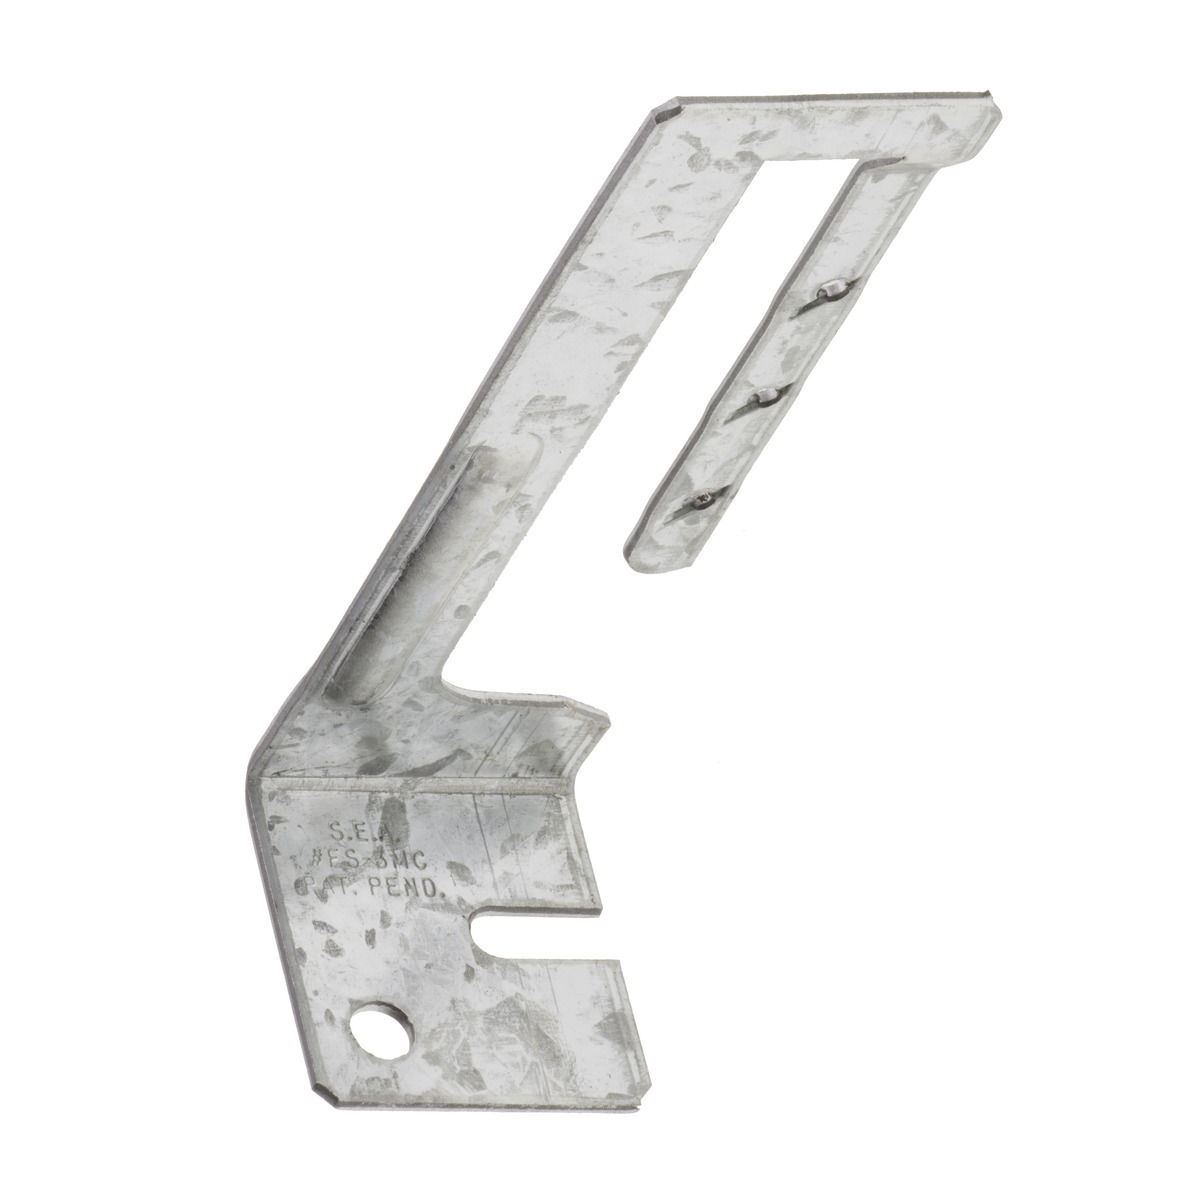 nVent Caddy MCS1004Z :: BRACKET,SUPPORT,CABLE MC/AC #12/14 FROM DROP WIRE  :: Gexpro